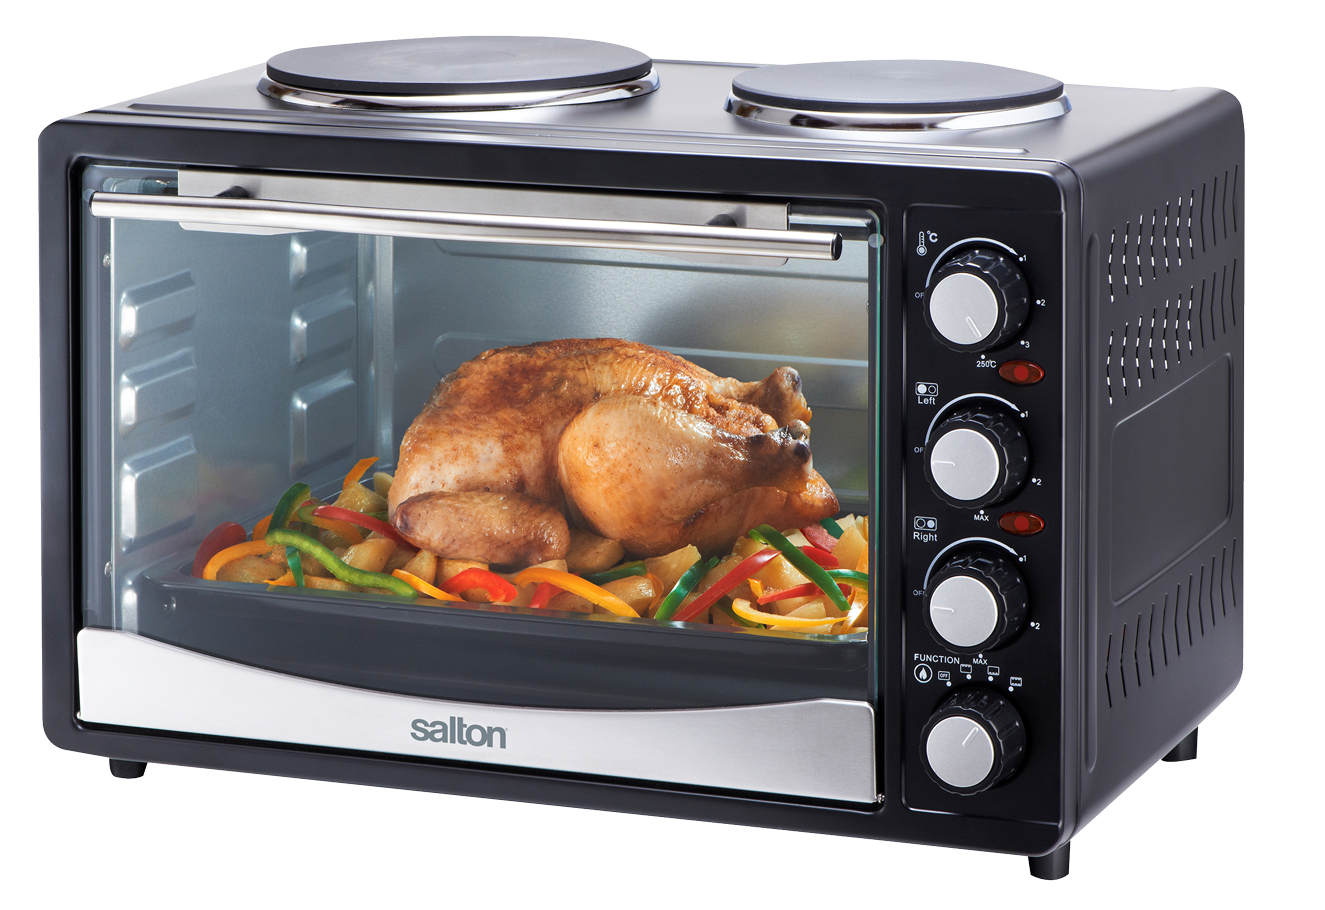 Microwave Oven Png - Microwave Toaster Oven Png Image, Transparent background PNG HD thumbnail